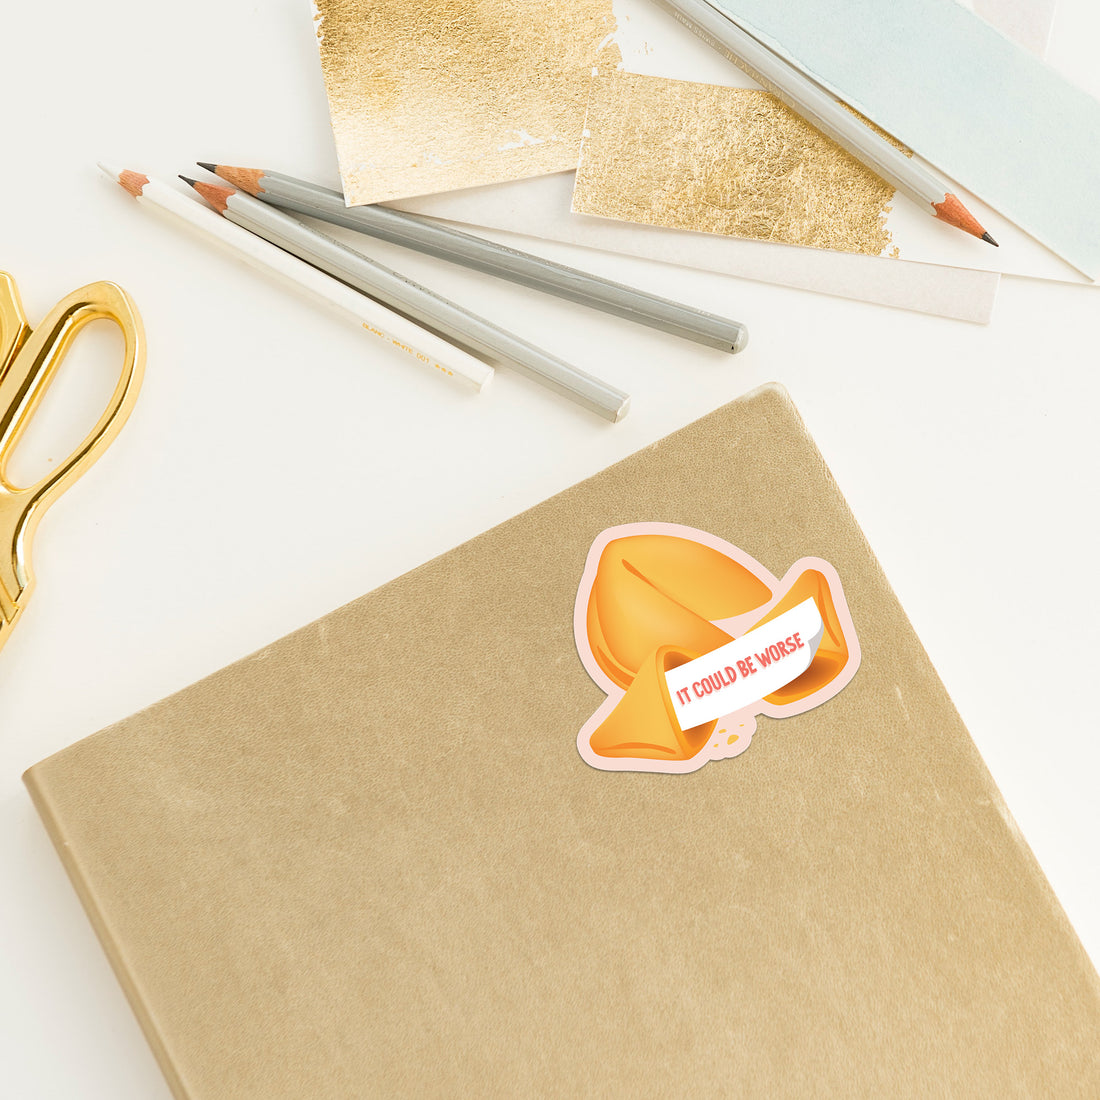 It could be worse fortune cookie vinyl sticker by I&